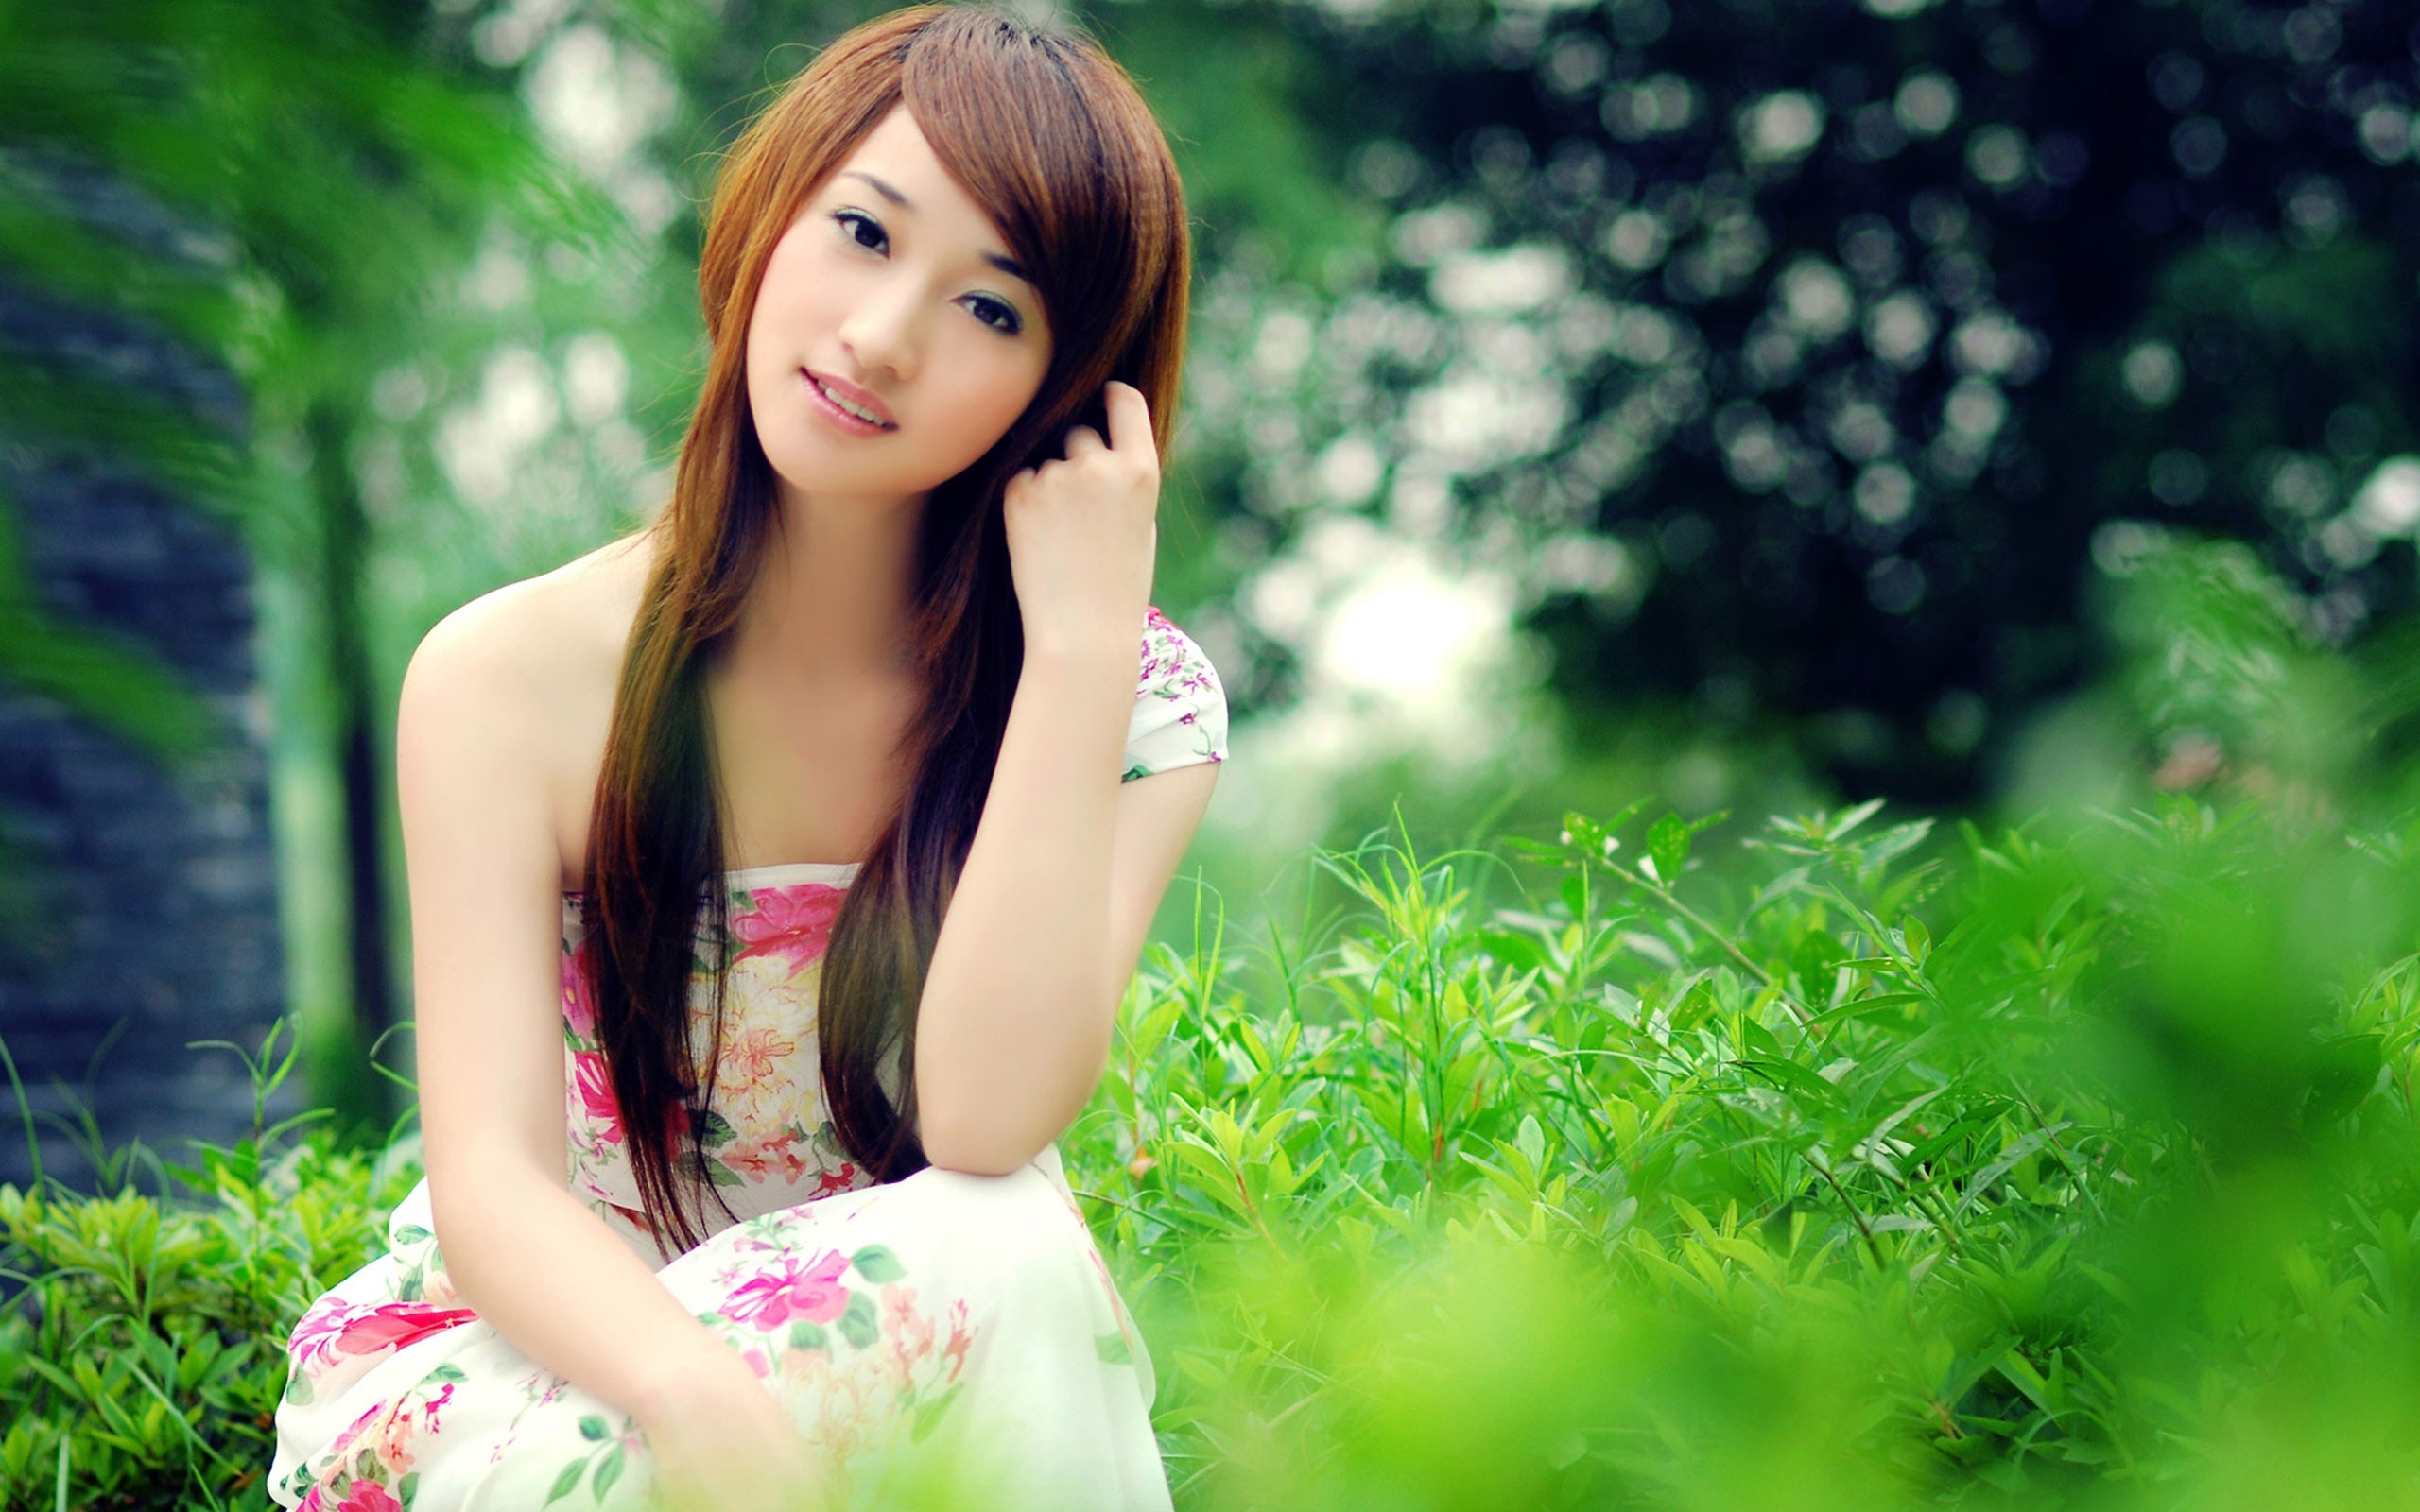 Asian Girl Dress Wallpaper Hd Girls 4k Wallpapers Images And Background Wallpapers Den 